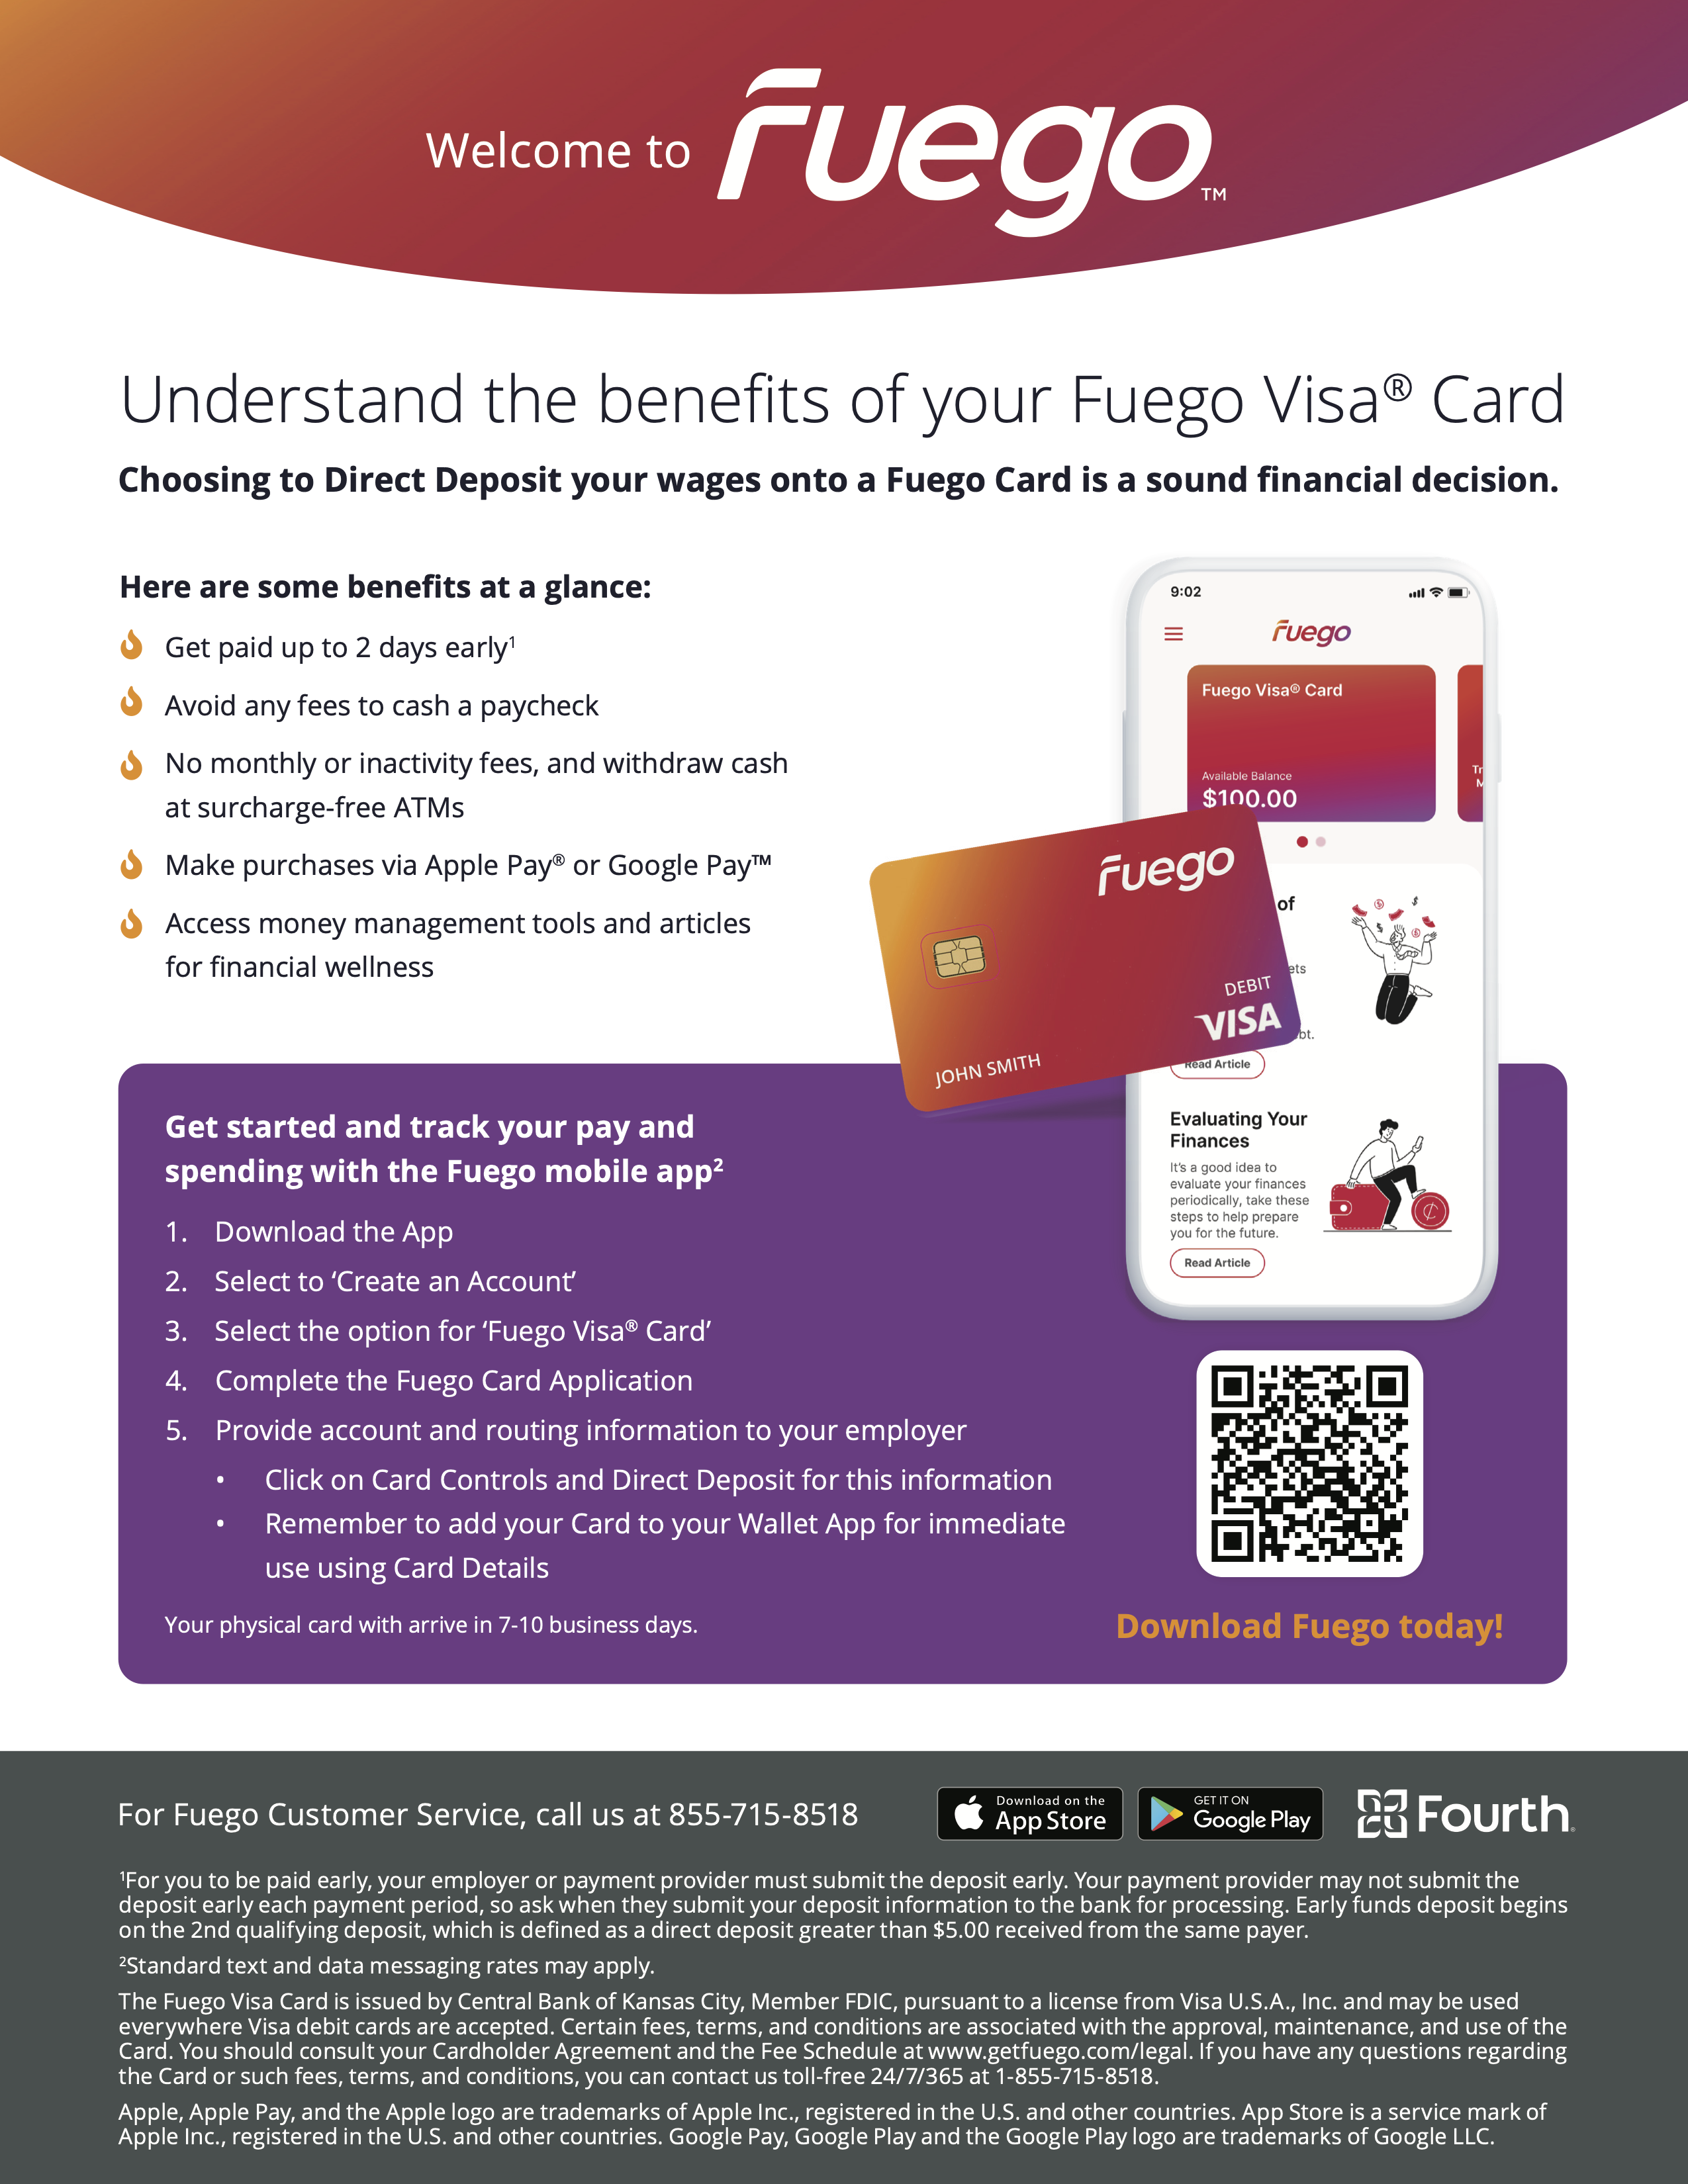 Fuego Employee Flyer_Understand the benefits of the Fuego Visa Card (1).png